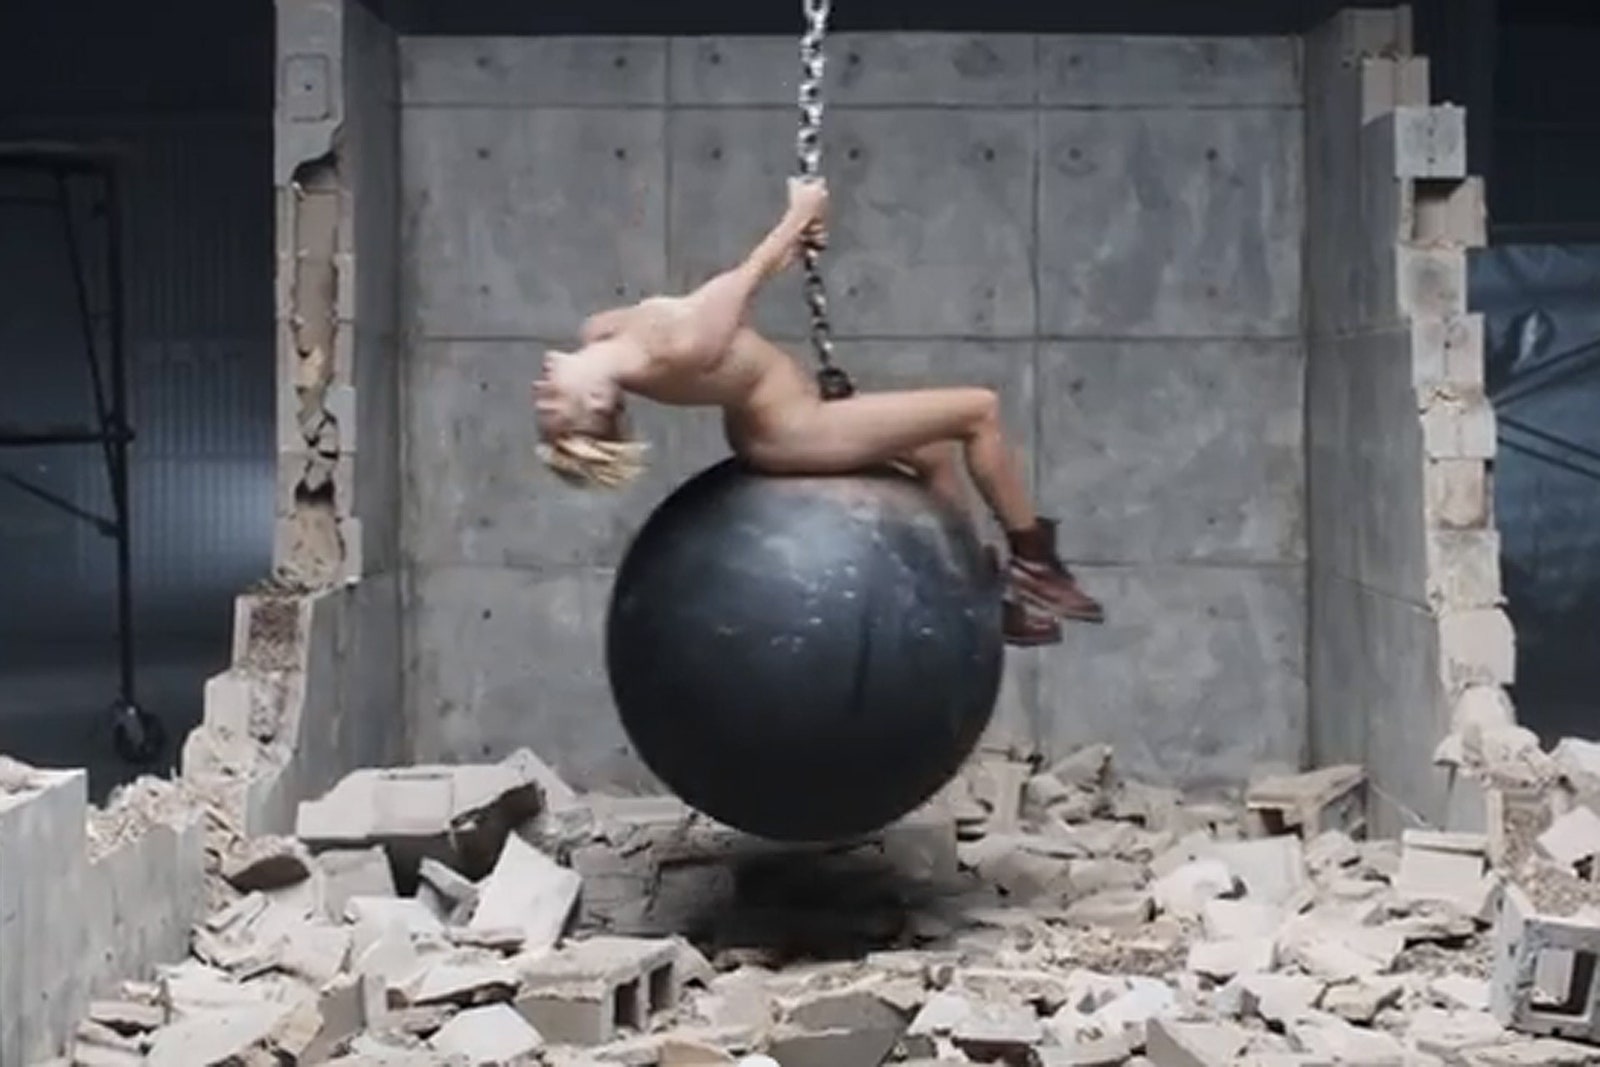 danny mc allister add photo miley cyrus naked on wrecking ball